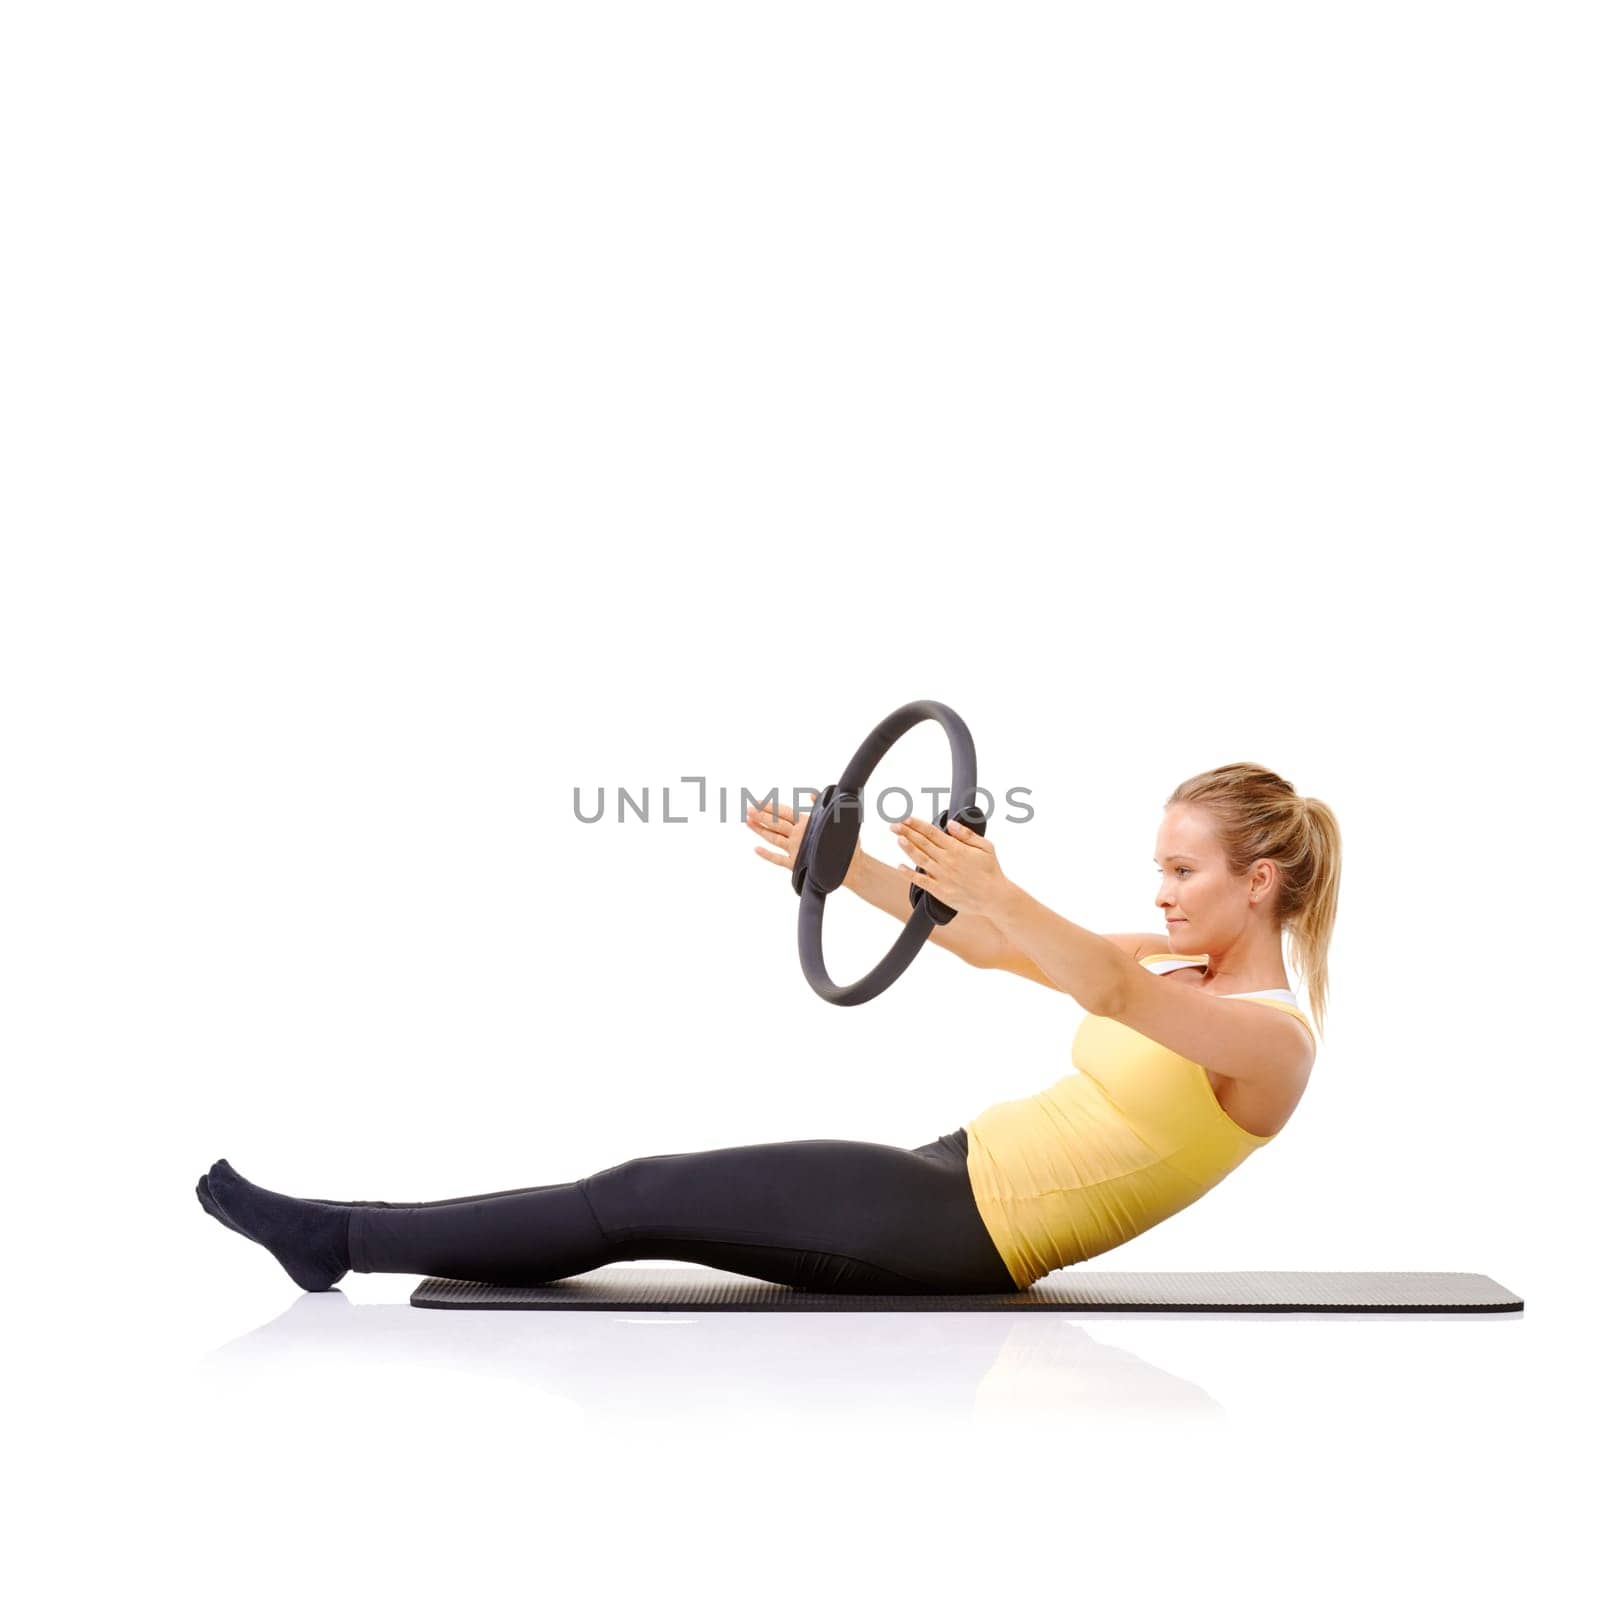 Woman, pilates ring and yoga mat for balance exercise or resistance training, strong core or studio white background. Female person, equipment for muscle wellbeing or abs workout, health or mockup.